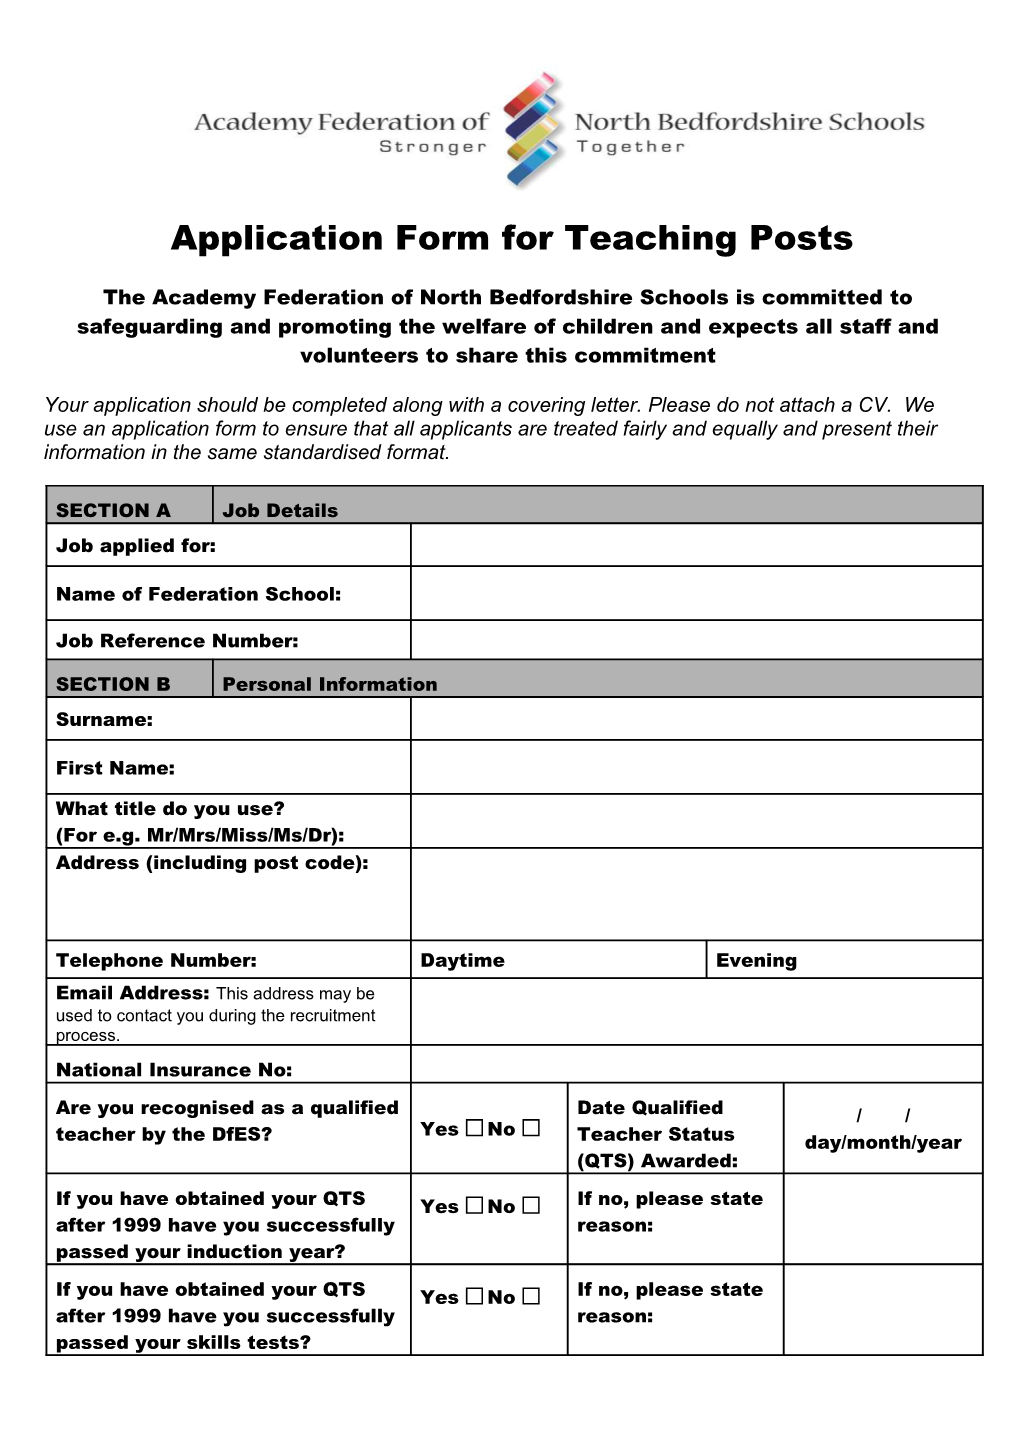 Application for Employment: Teaching Posts